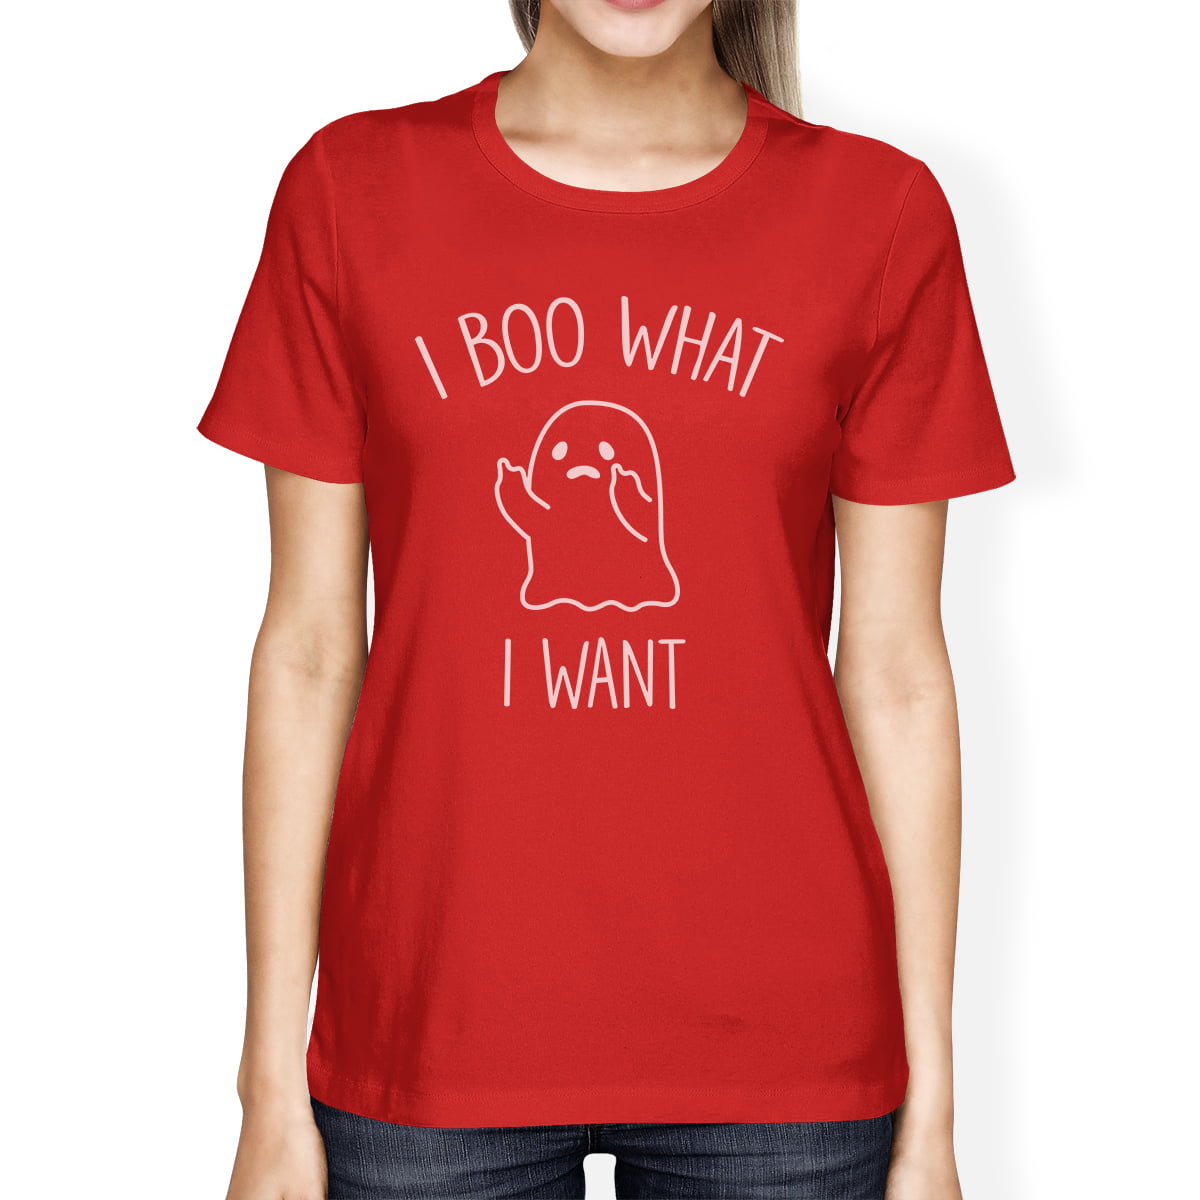 Unisex Jersey Short Sleeve Tee Spooky T-shirt Cute Ghost Shirt This is My Human Costume Tee Funny Halloween Shirt